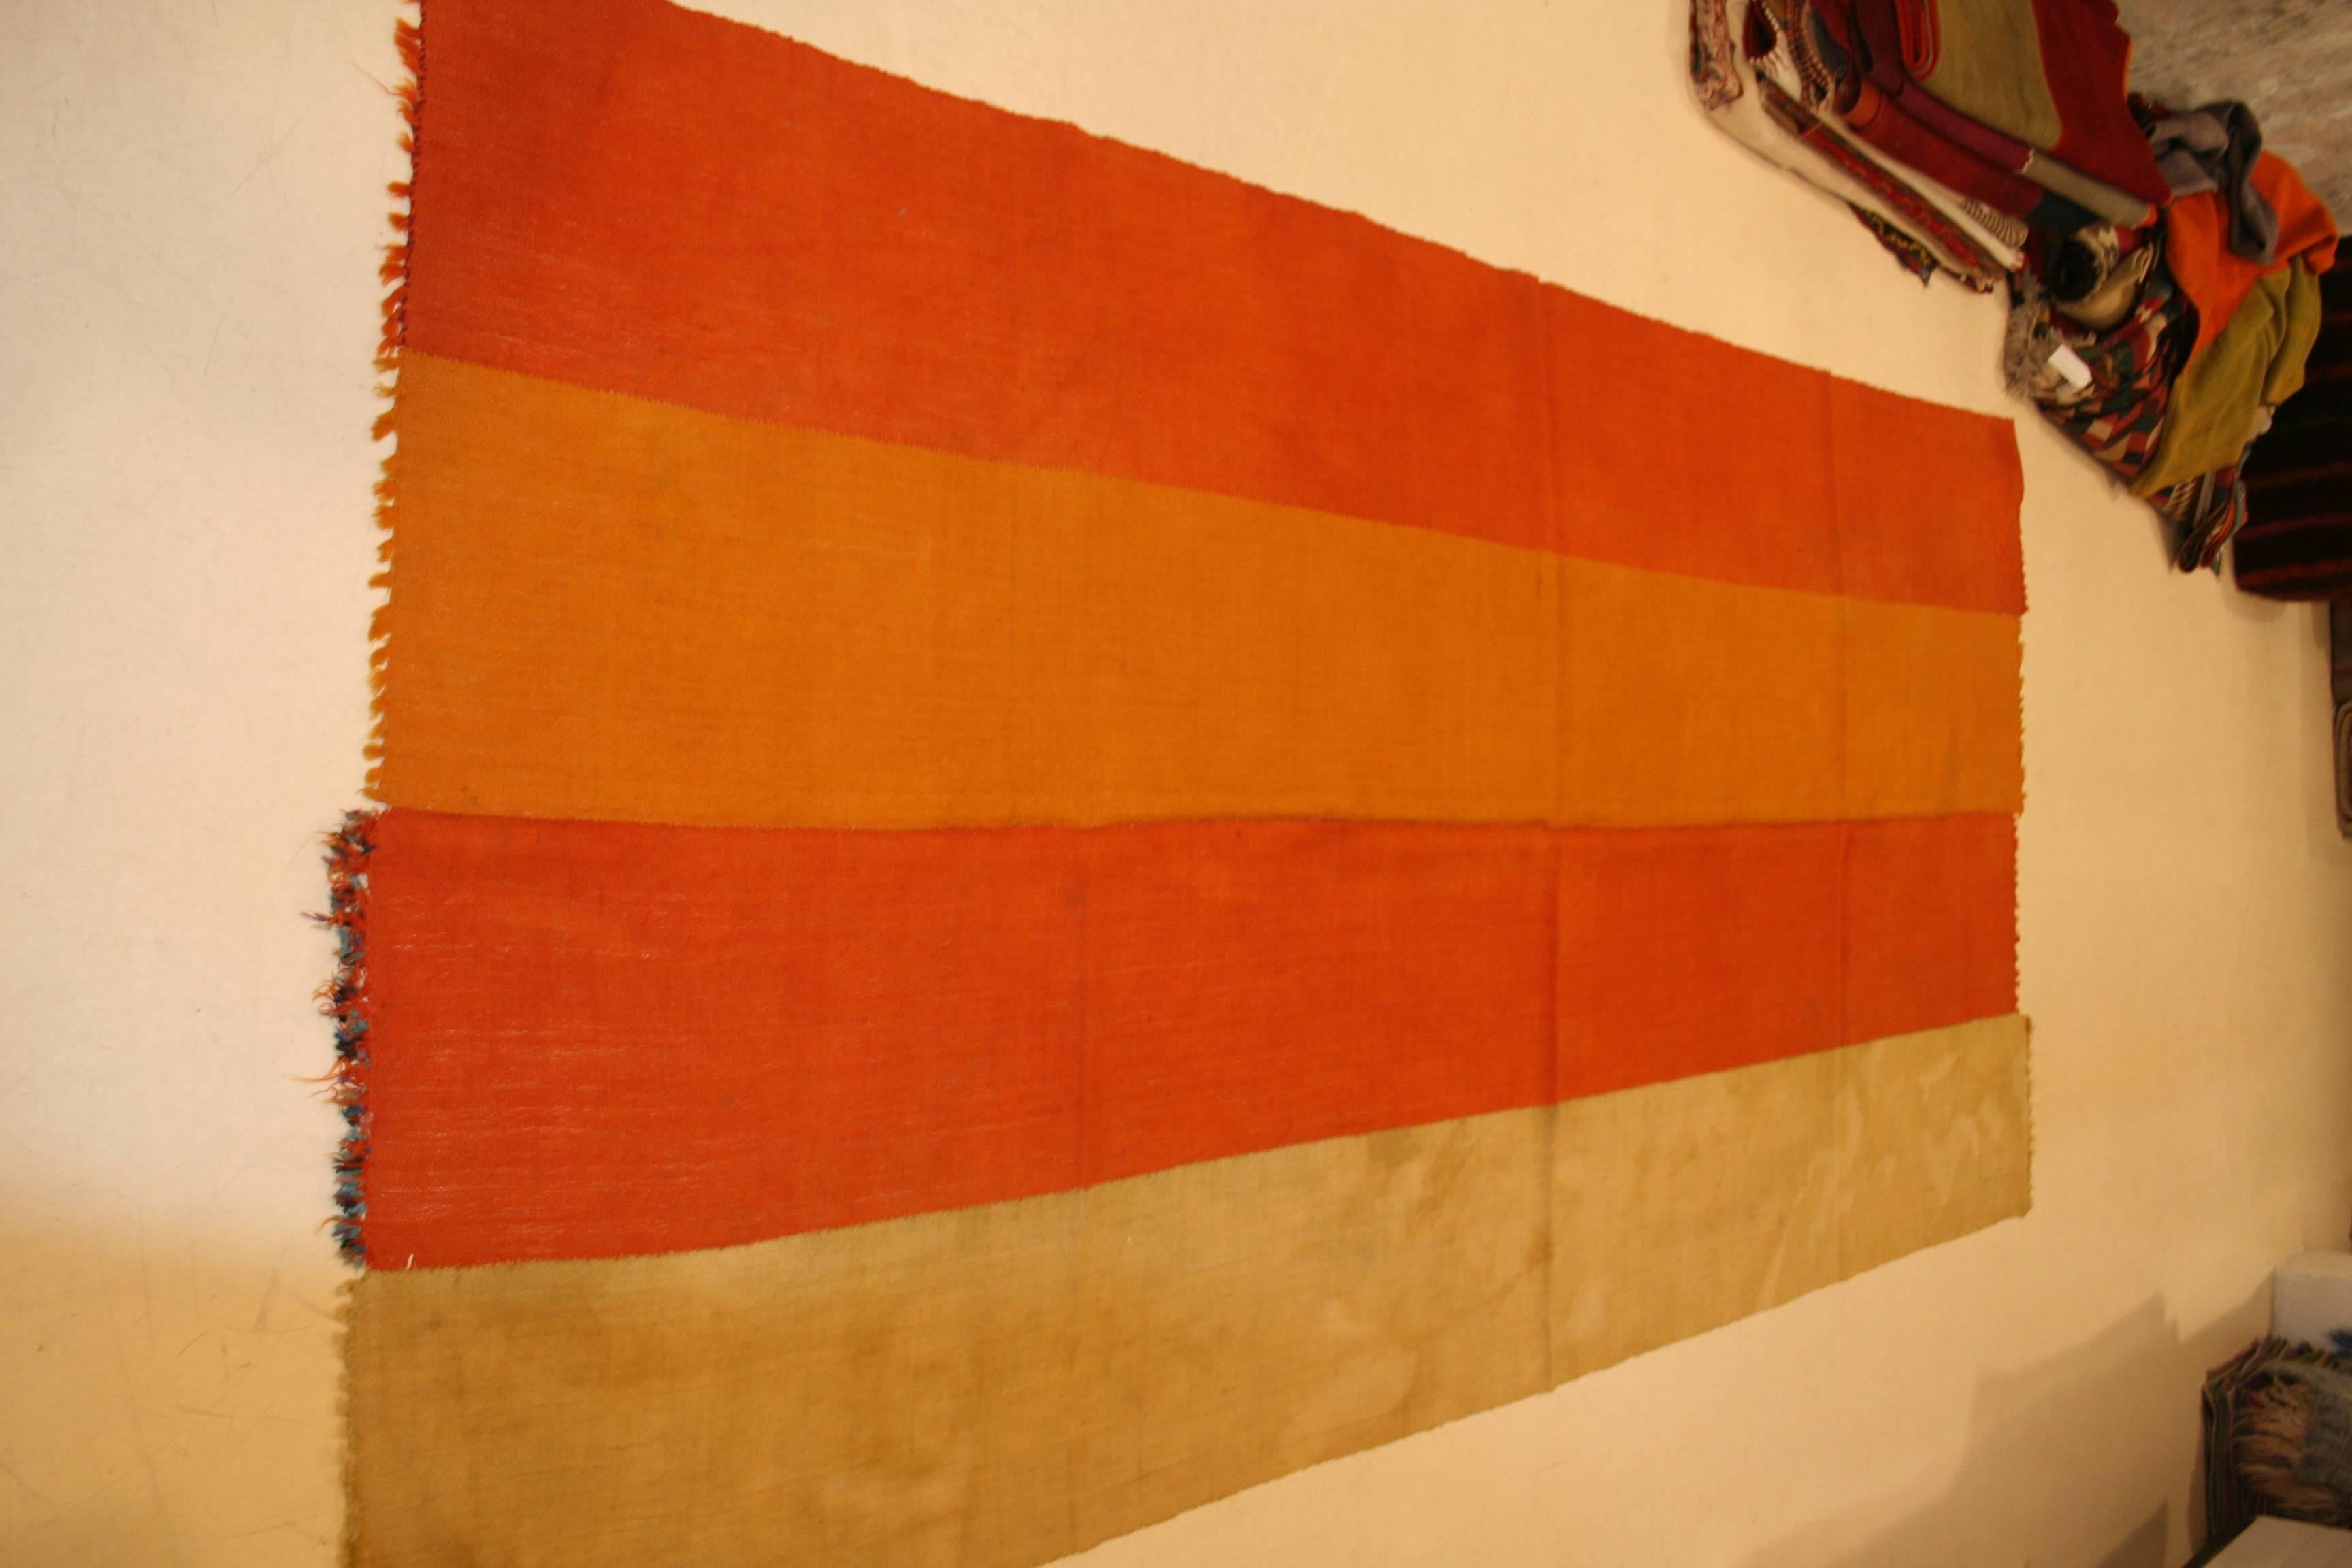 Woven in three very subtle colors, this Turkish wool flat-weave was used by Kurdish nomadic tribes located around the area of Sivas as a tent divider, hanging from the ceiling of the tent creating a partition. Called 'perdeh', which means curtain in